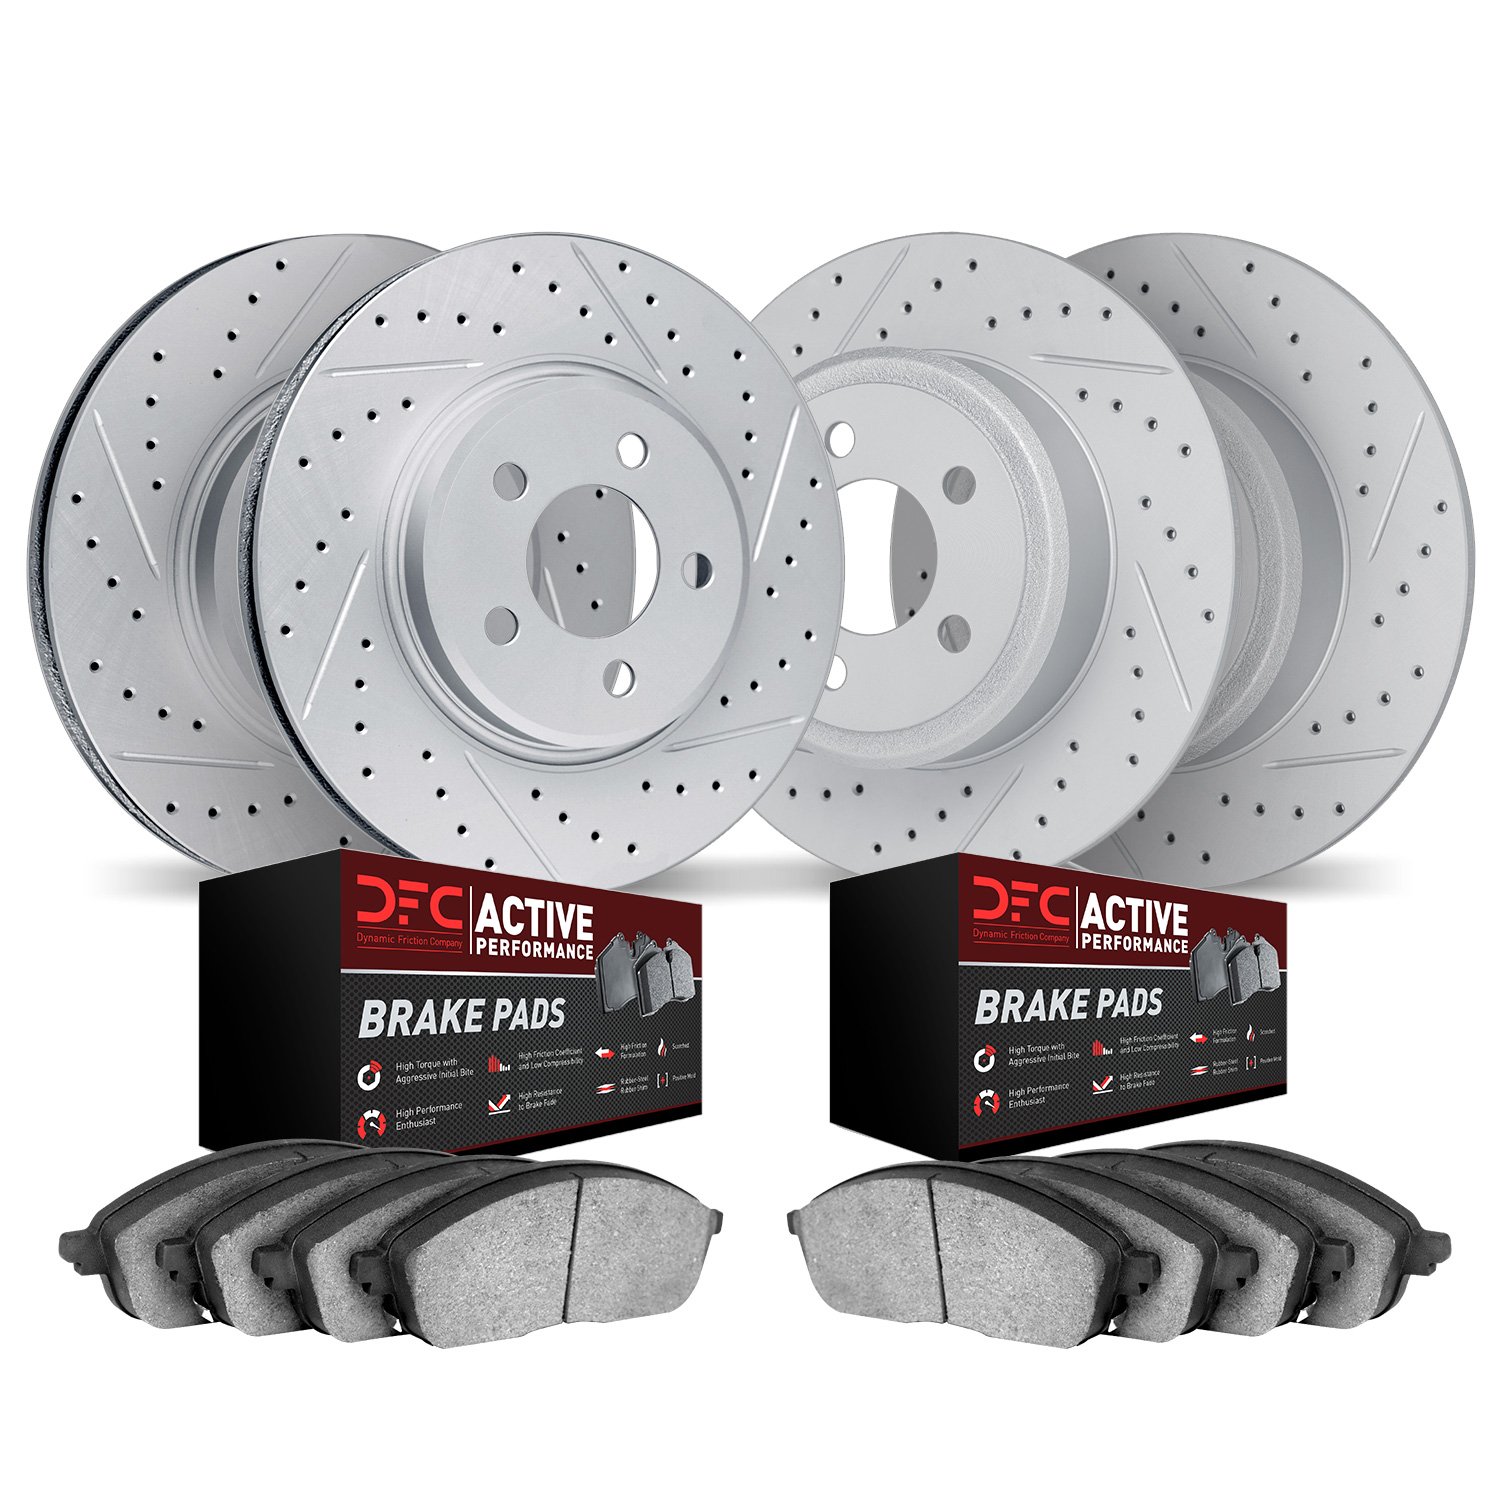 2704-80006 Geoperformance Drilled/Slotted Brake Rotors with Active Performance Pads Kit, 2004-2013 Ford/Lincoln/Mercury/Mazda, P